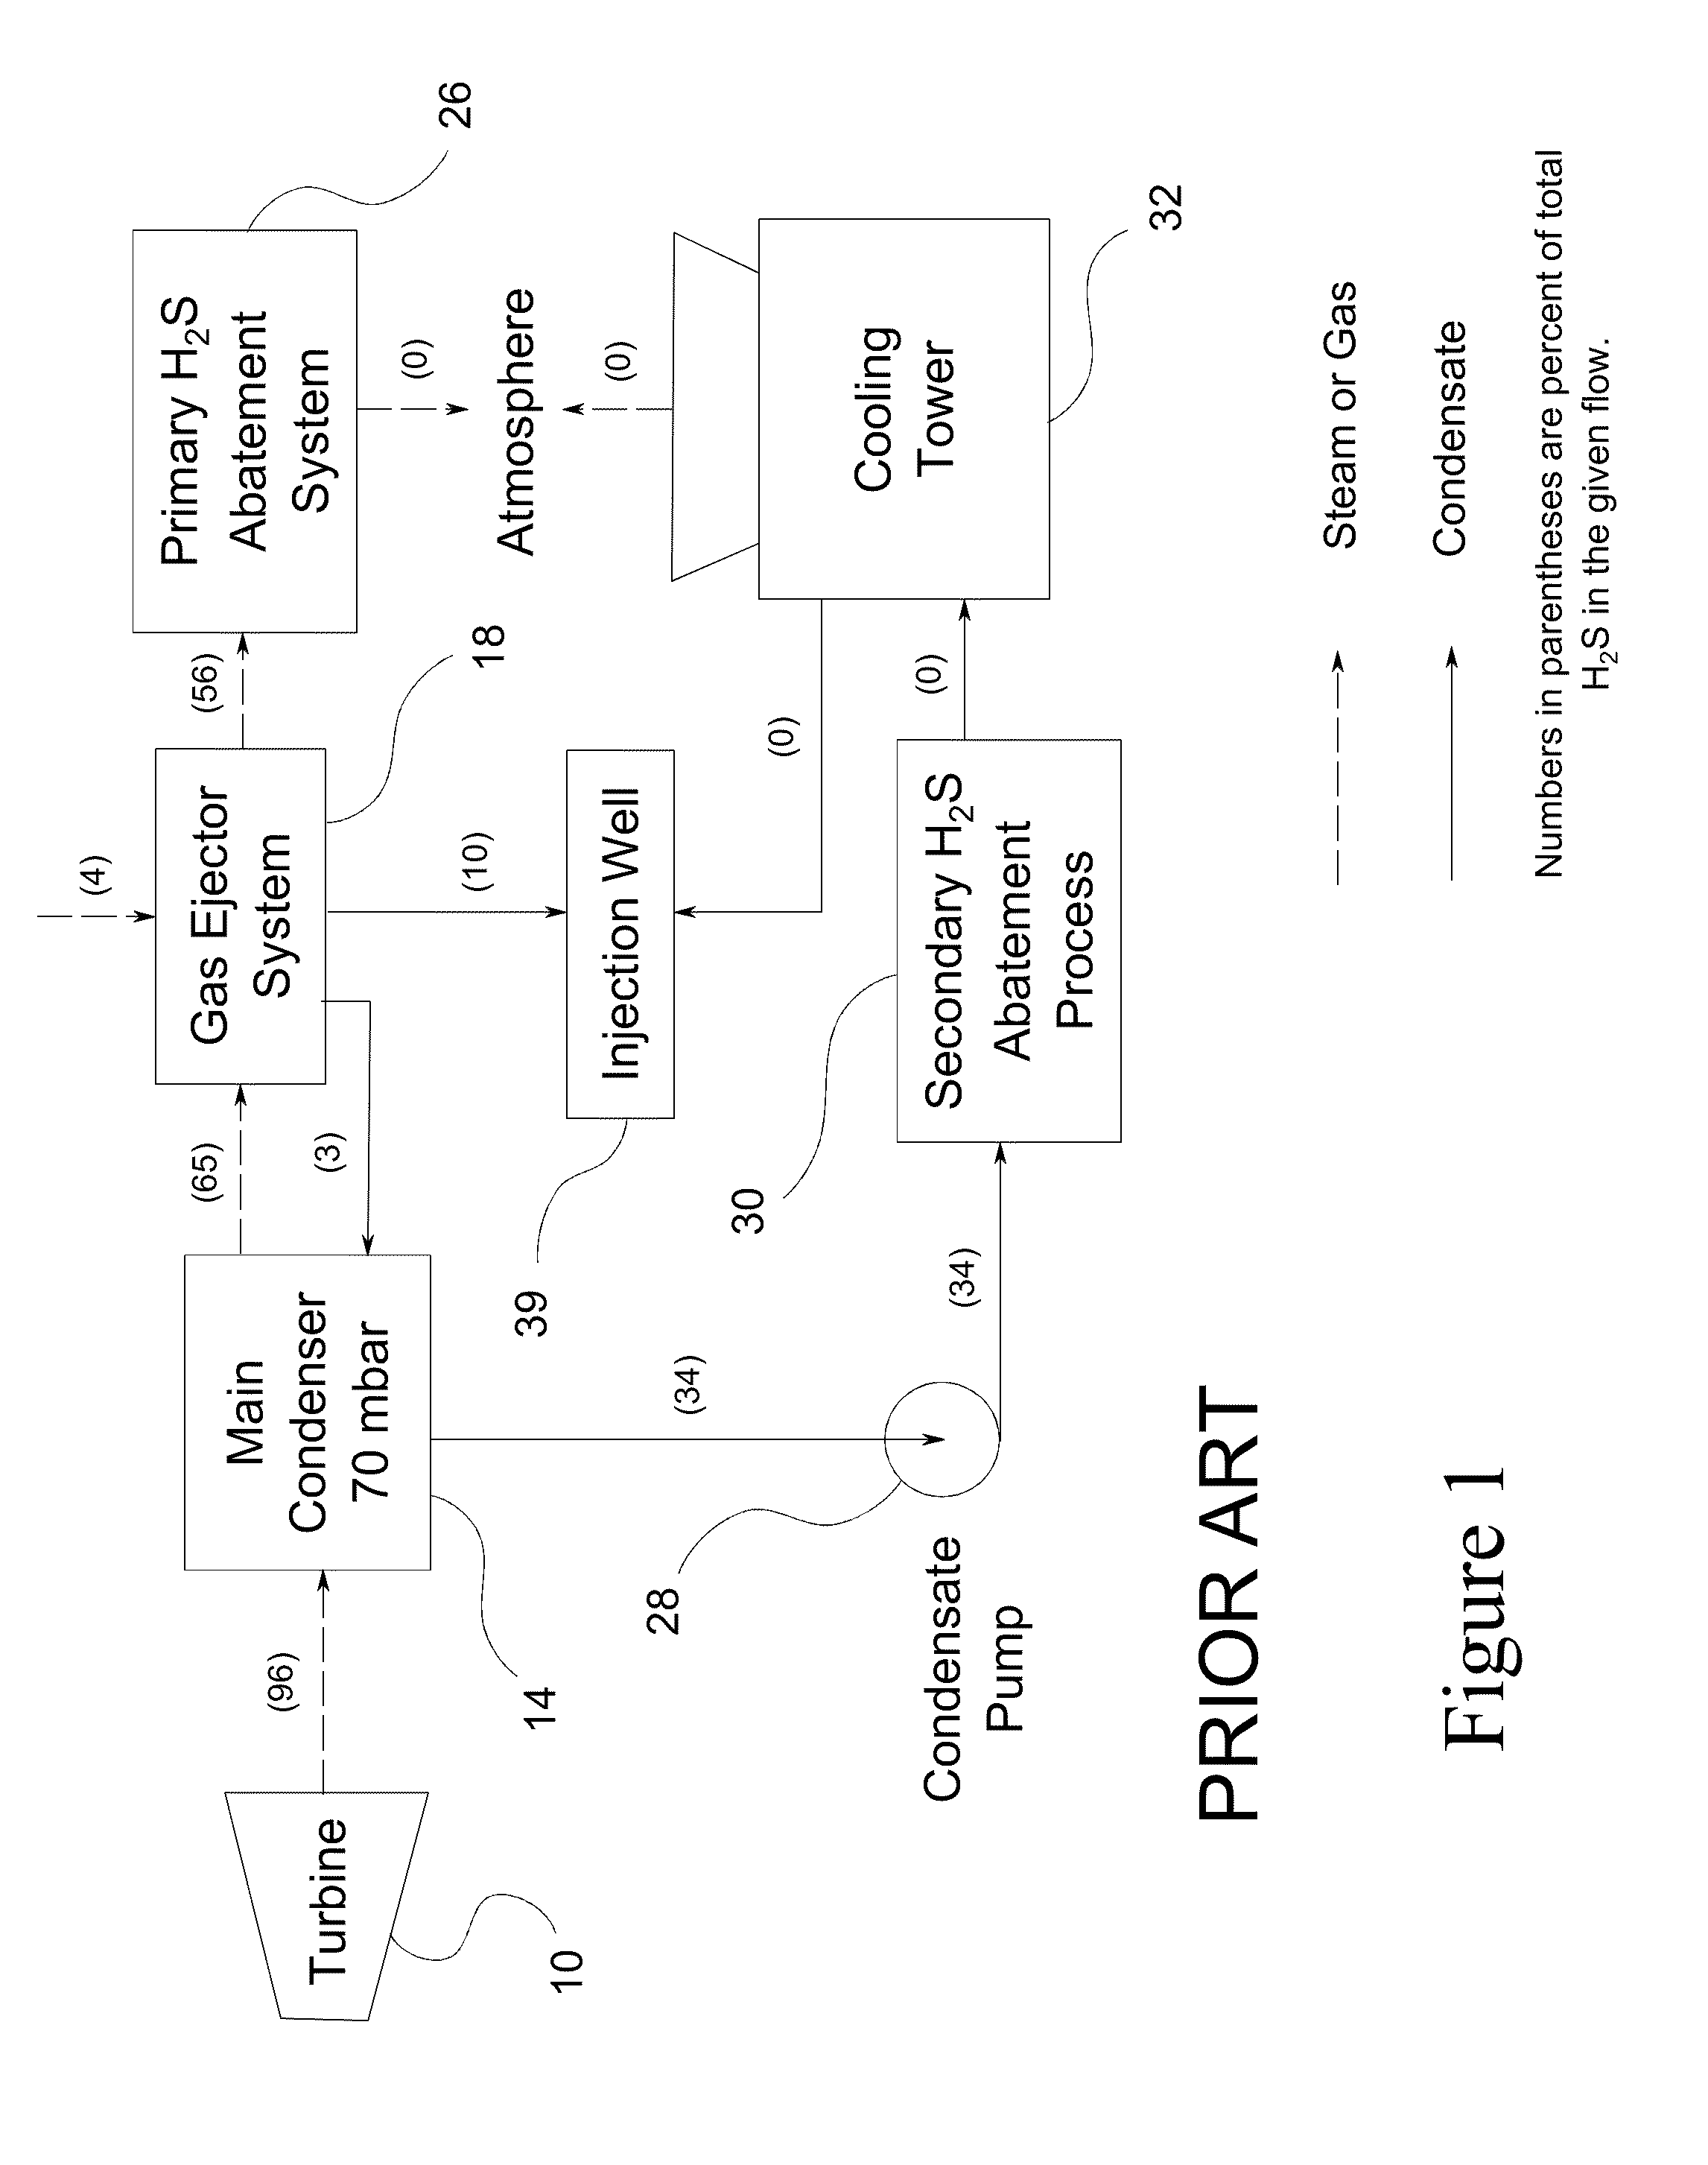 Method and Device to Remove Hydrogen Sulfide from Steam Condensate in a Geothermal Power Generating Unit